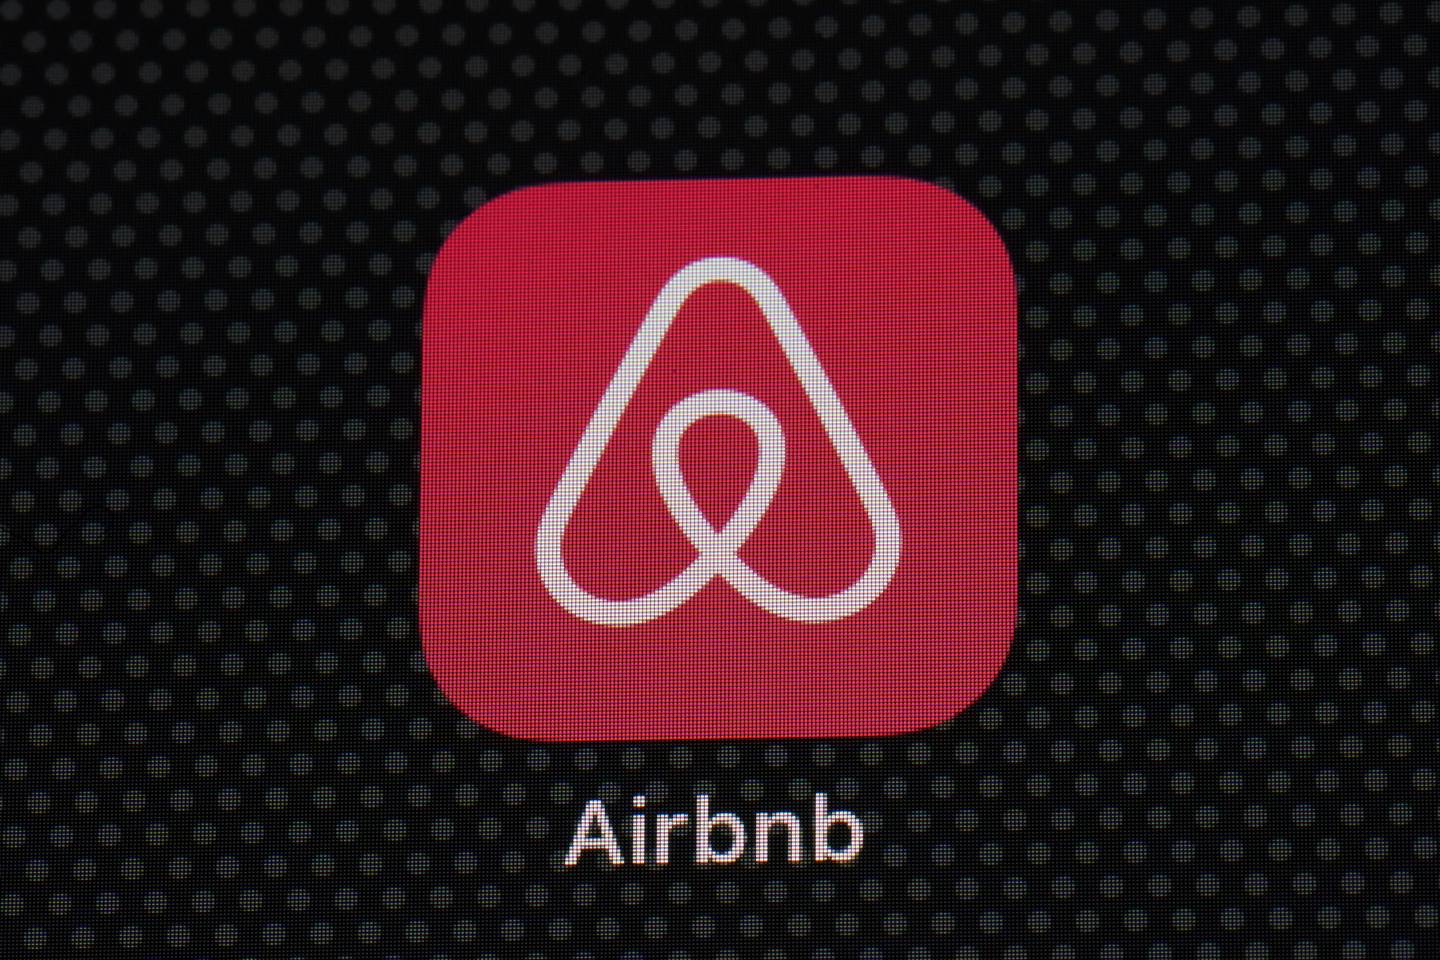 Airbnb said customers should always pay for stays through its secure in-house portal and never agree to send money directly to landlords. AP Photo 